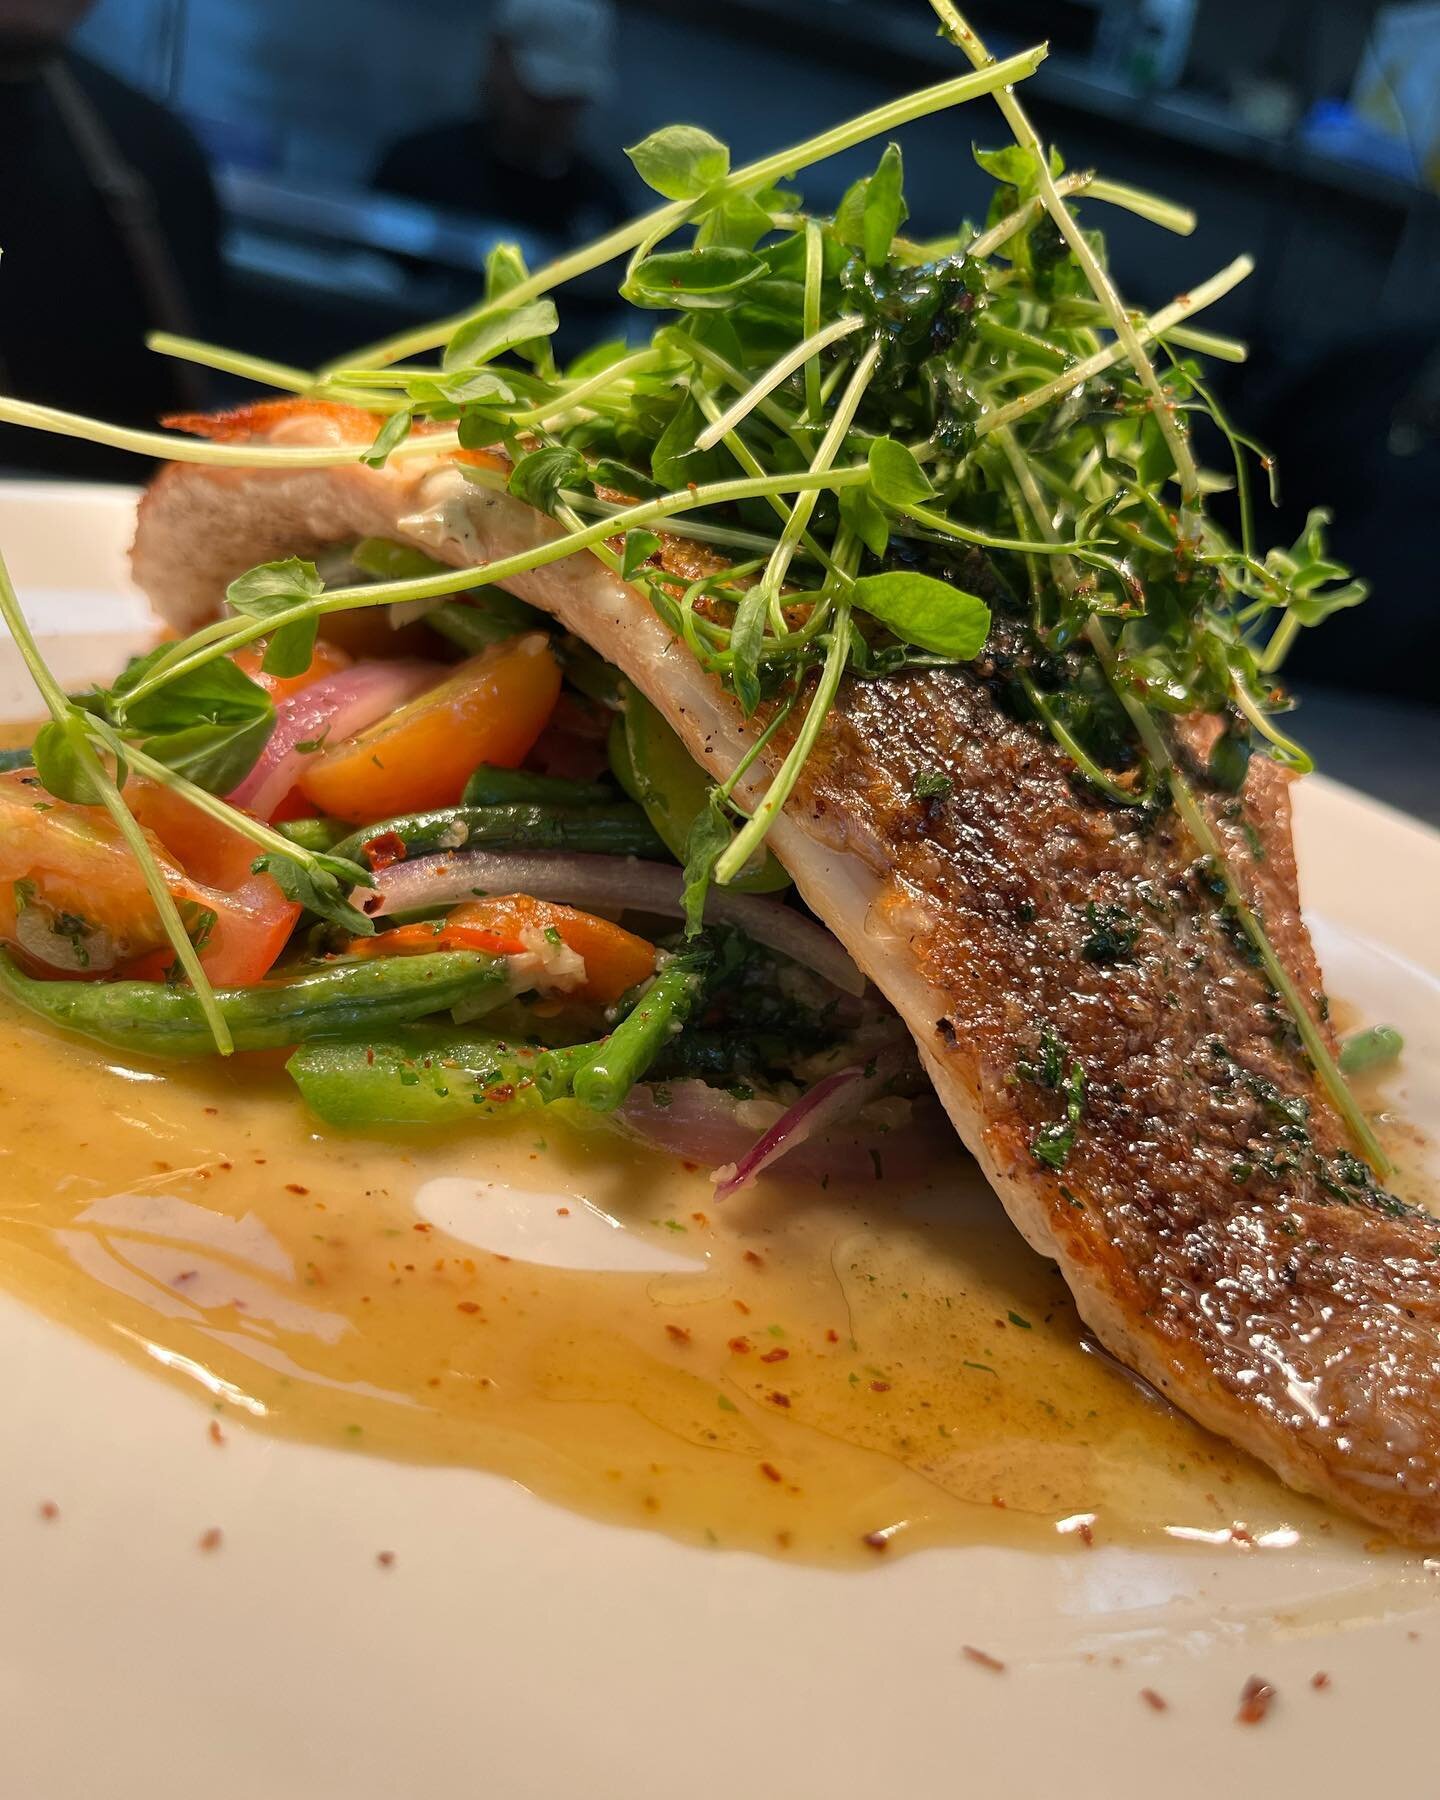 🚨Tonight&rsquo;s Special 🚨

Red Snapper Meuni&egrave;re - Pan seared Served on a veggie medley (green beans, bok choy, cherry tomatoes) Garnished with smoked peas and a Brown lemon butter sauce

👨🏽&zwj;🍳 @adrianabella301 
📸 @kikisun5000